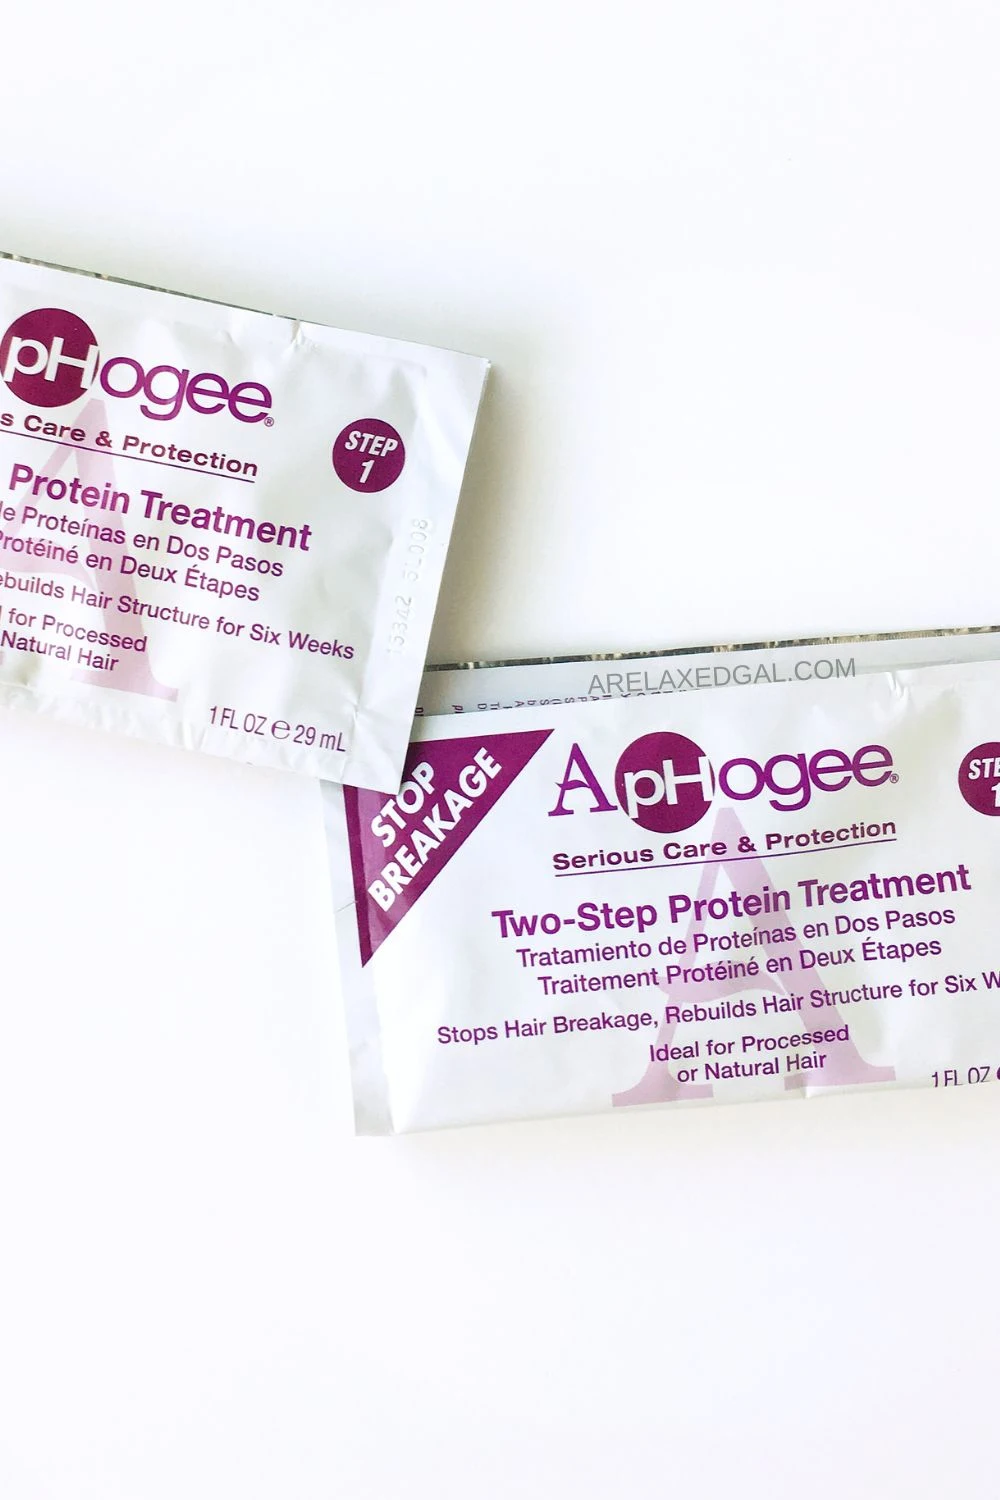 the aphogee two step protein treatment used for protein